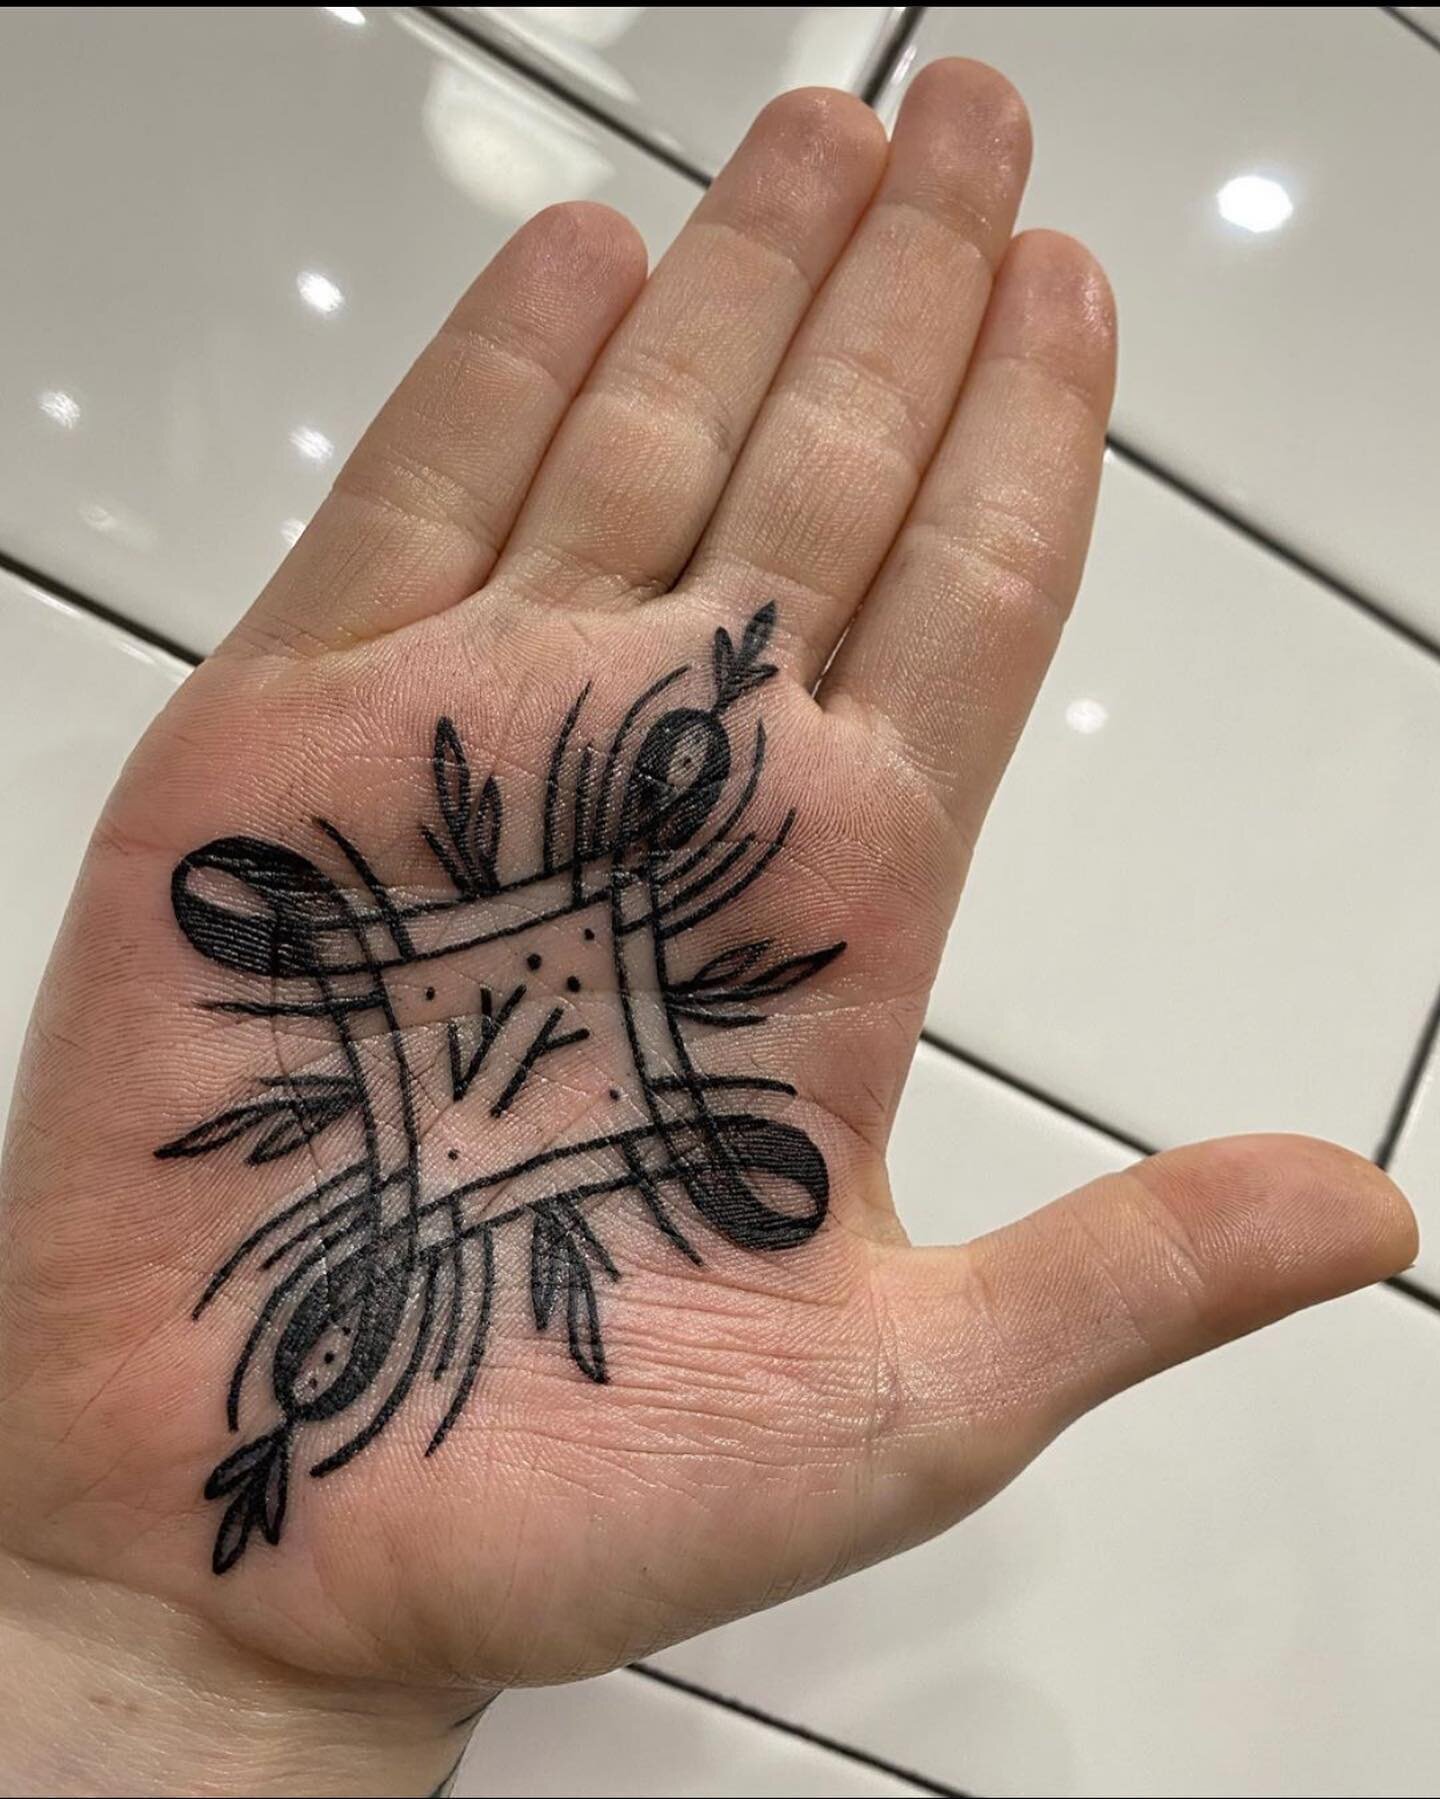 Ouch! Would you ever get a palm tattoo? Let us know in the comments below! Clean design on one of our BBTC members by @marissa.tattoo ! 
#palmtattoo #linework #bostonbarbertattooco #bostonbarber #bostontattoo #bostontattooartist #bostontattooshop #gi